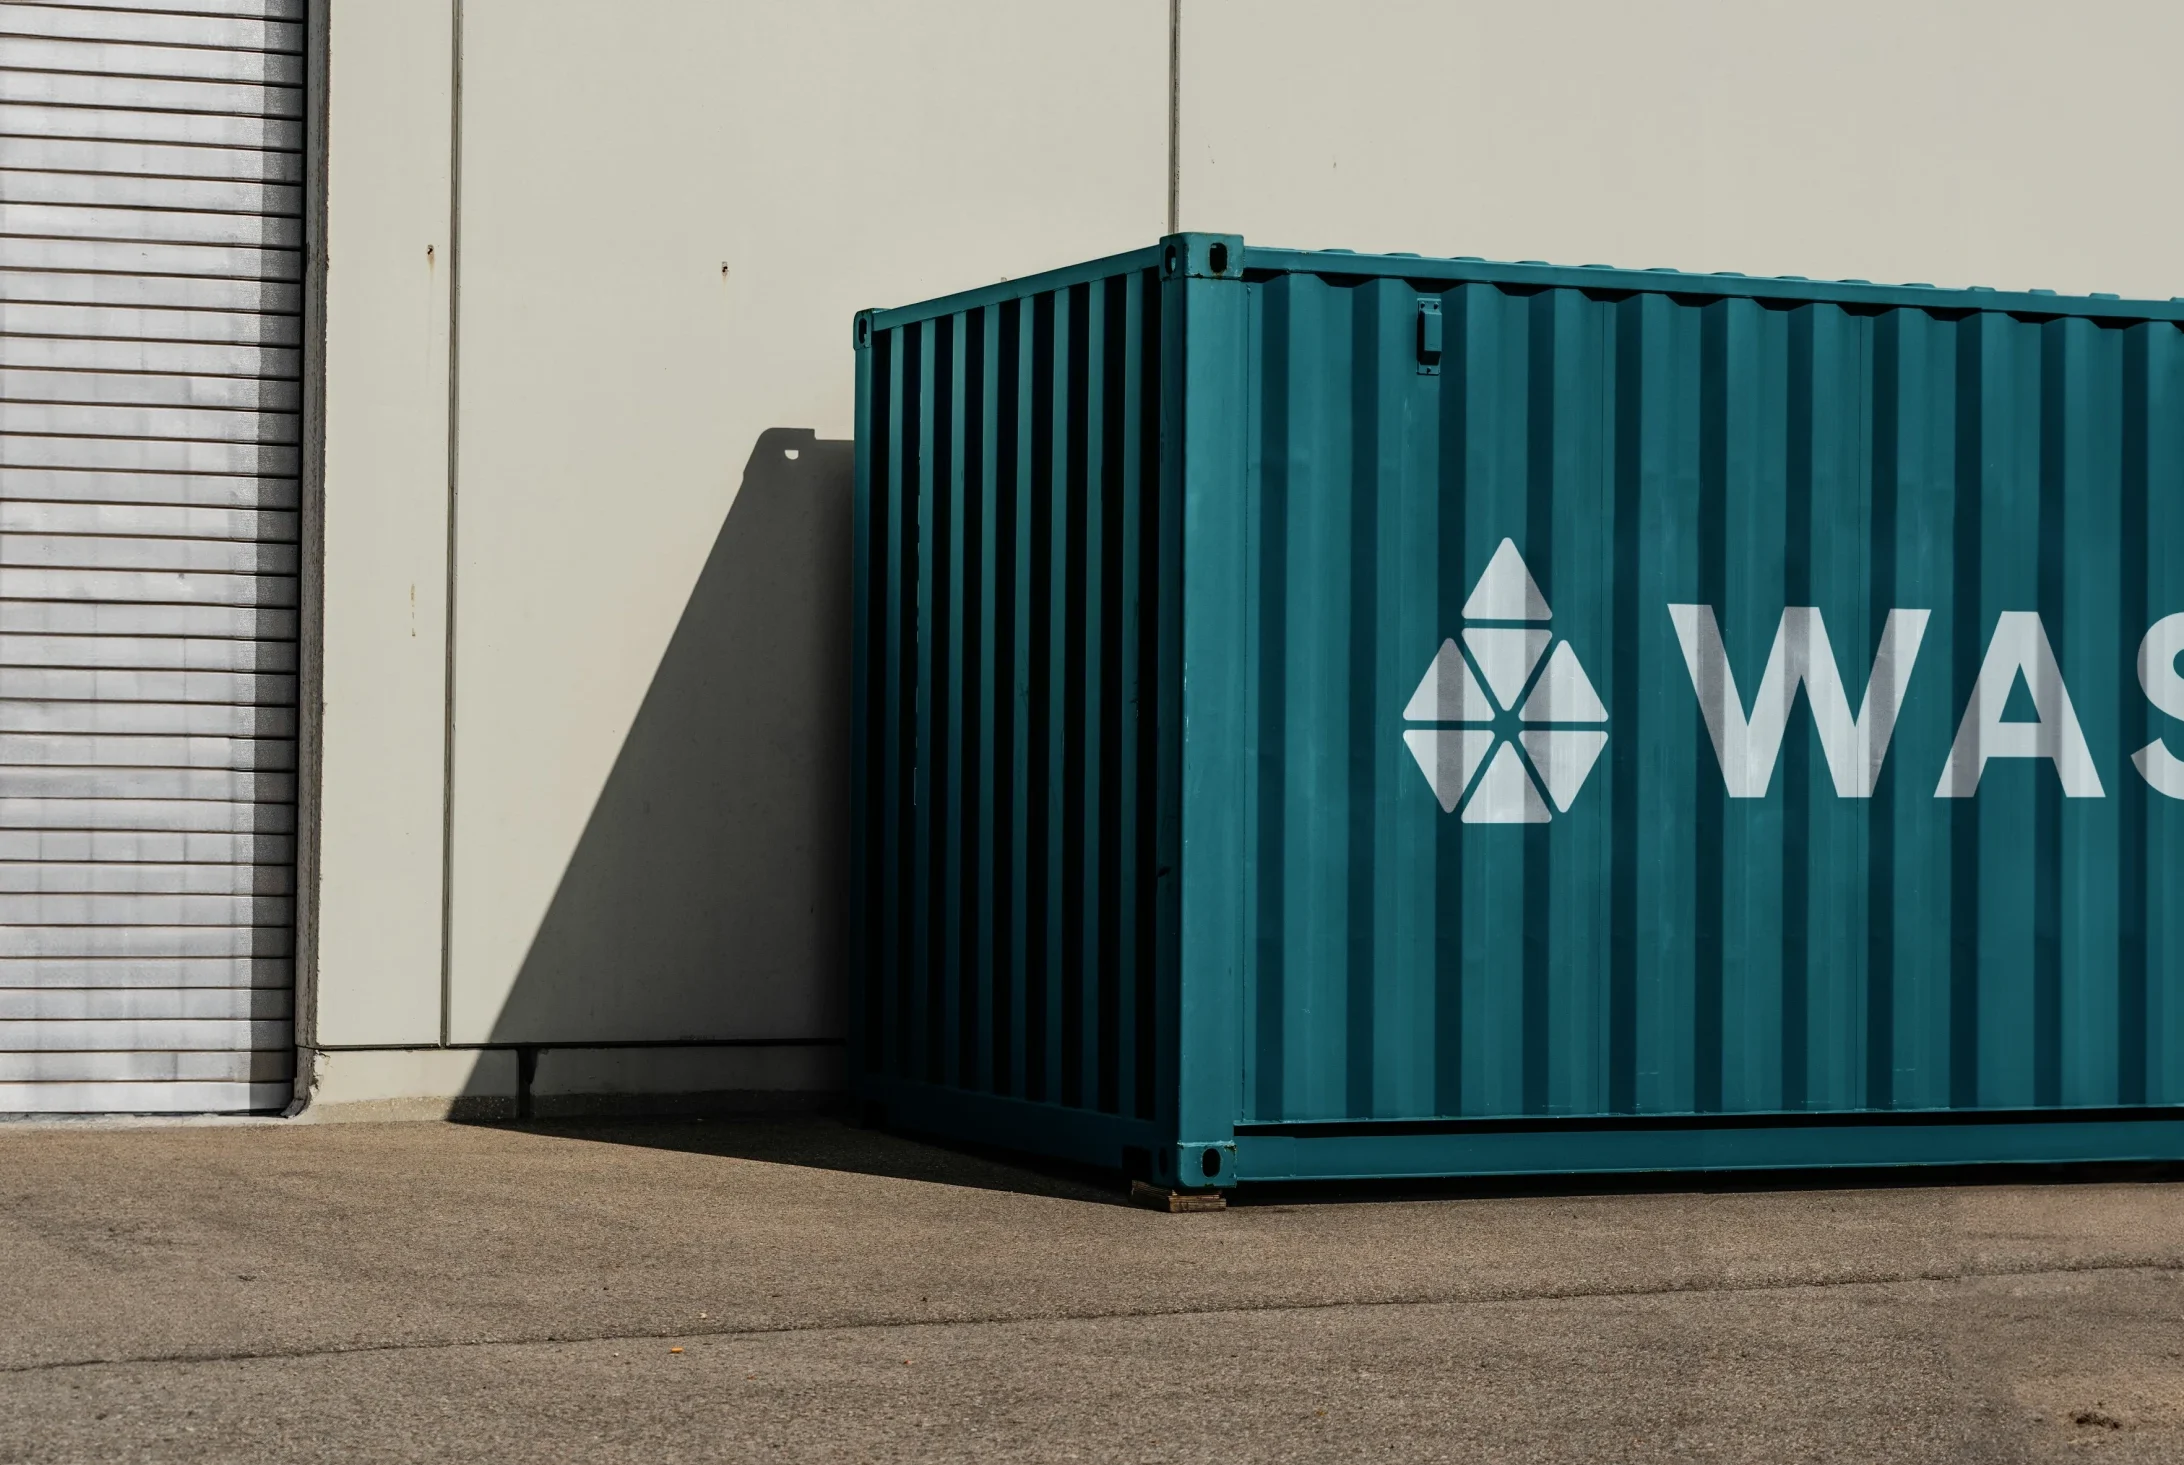 Image depicting a WASE electro-methanogenesis reactor in a shipping container with a WASE logo on the side.